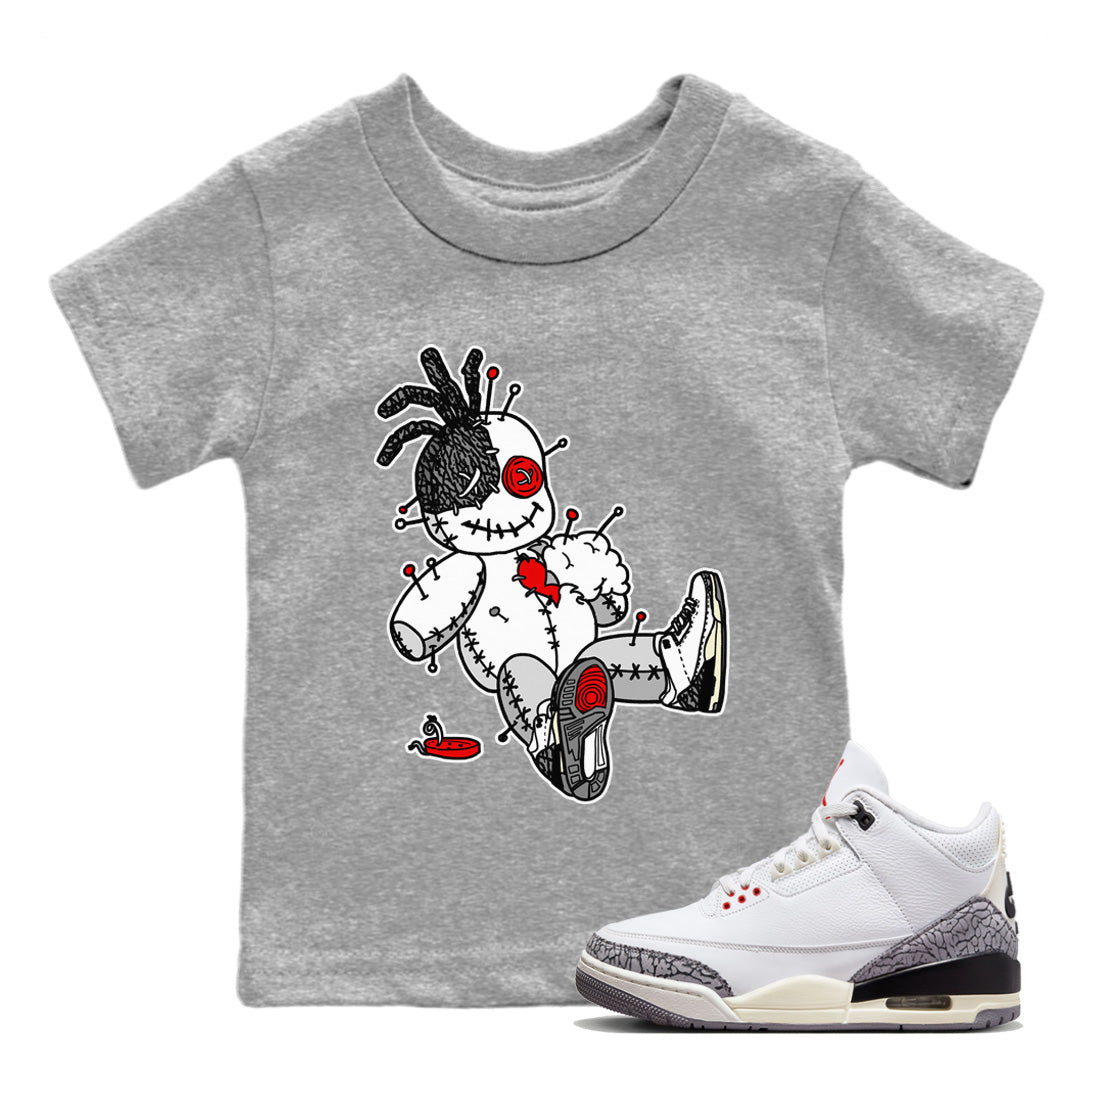 Air Jordan 3 White Cement Voodoo Doll Baby and Kids Sneaker Tees Air Jordan 3 Retro White Cement Kids Sneaker Tees Size Chart